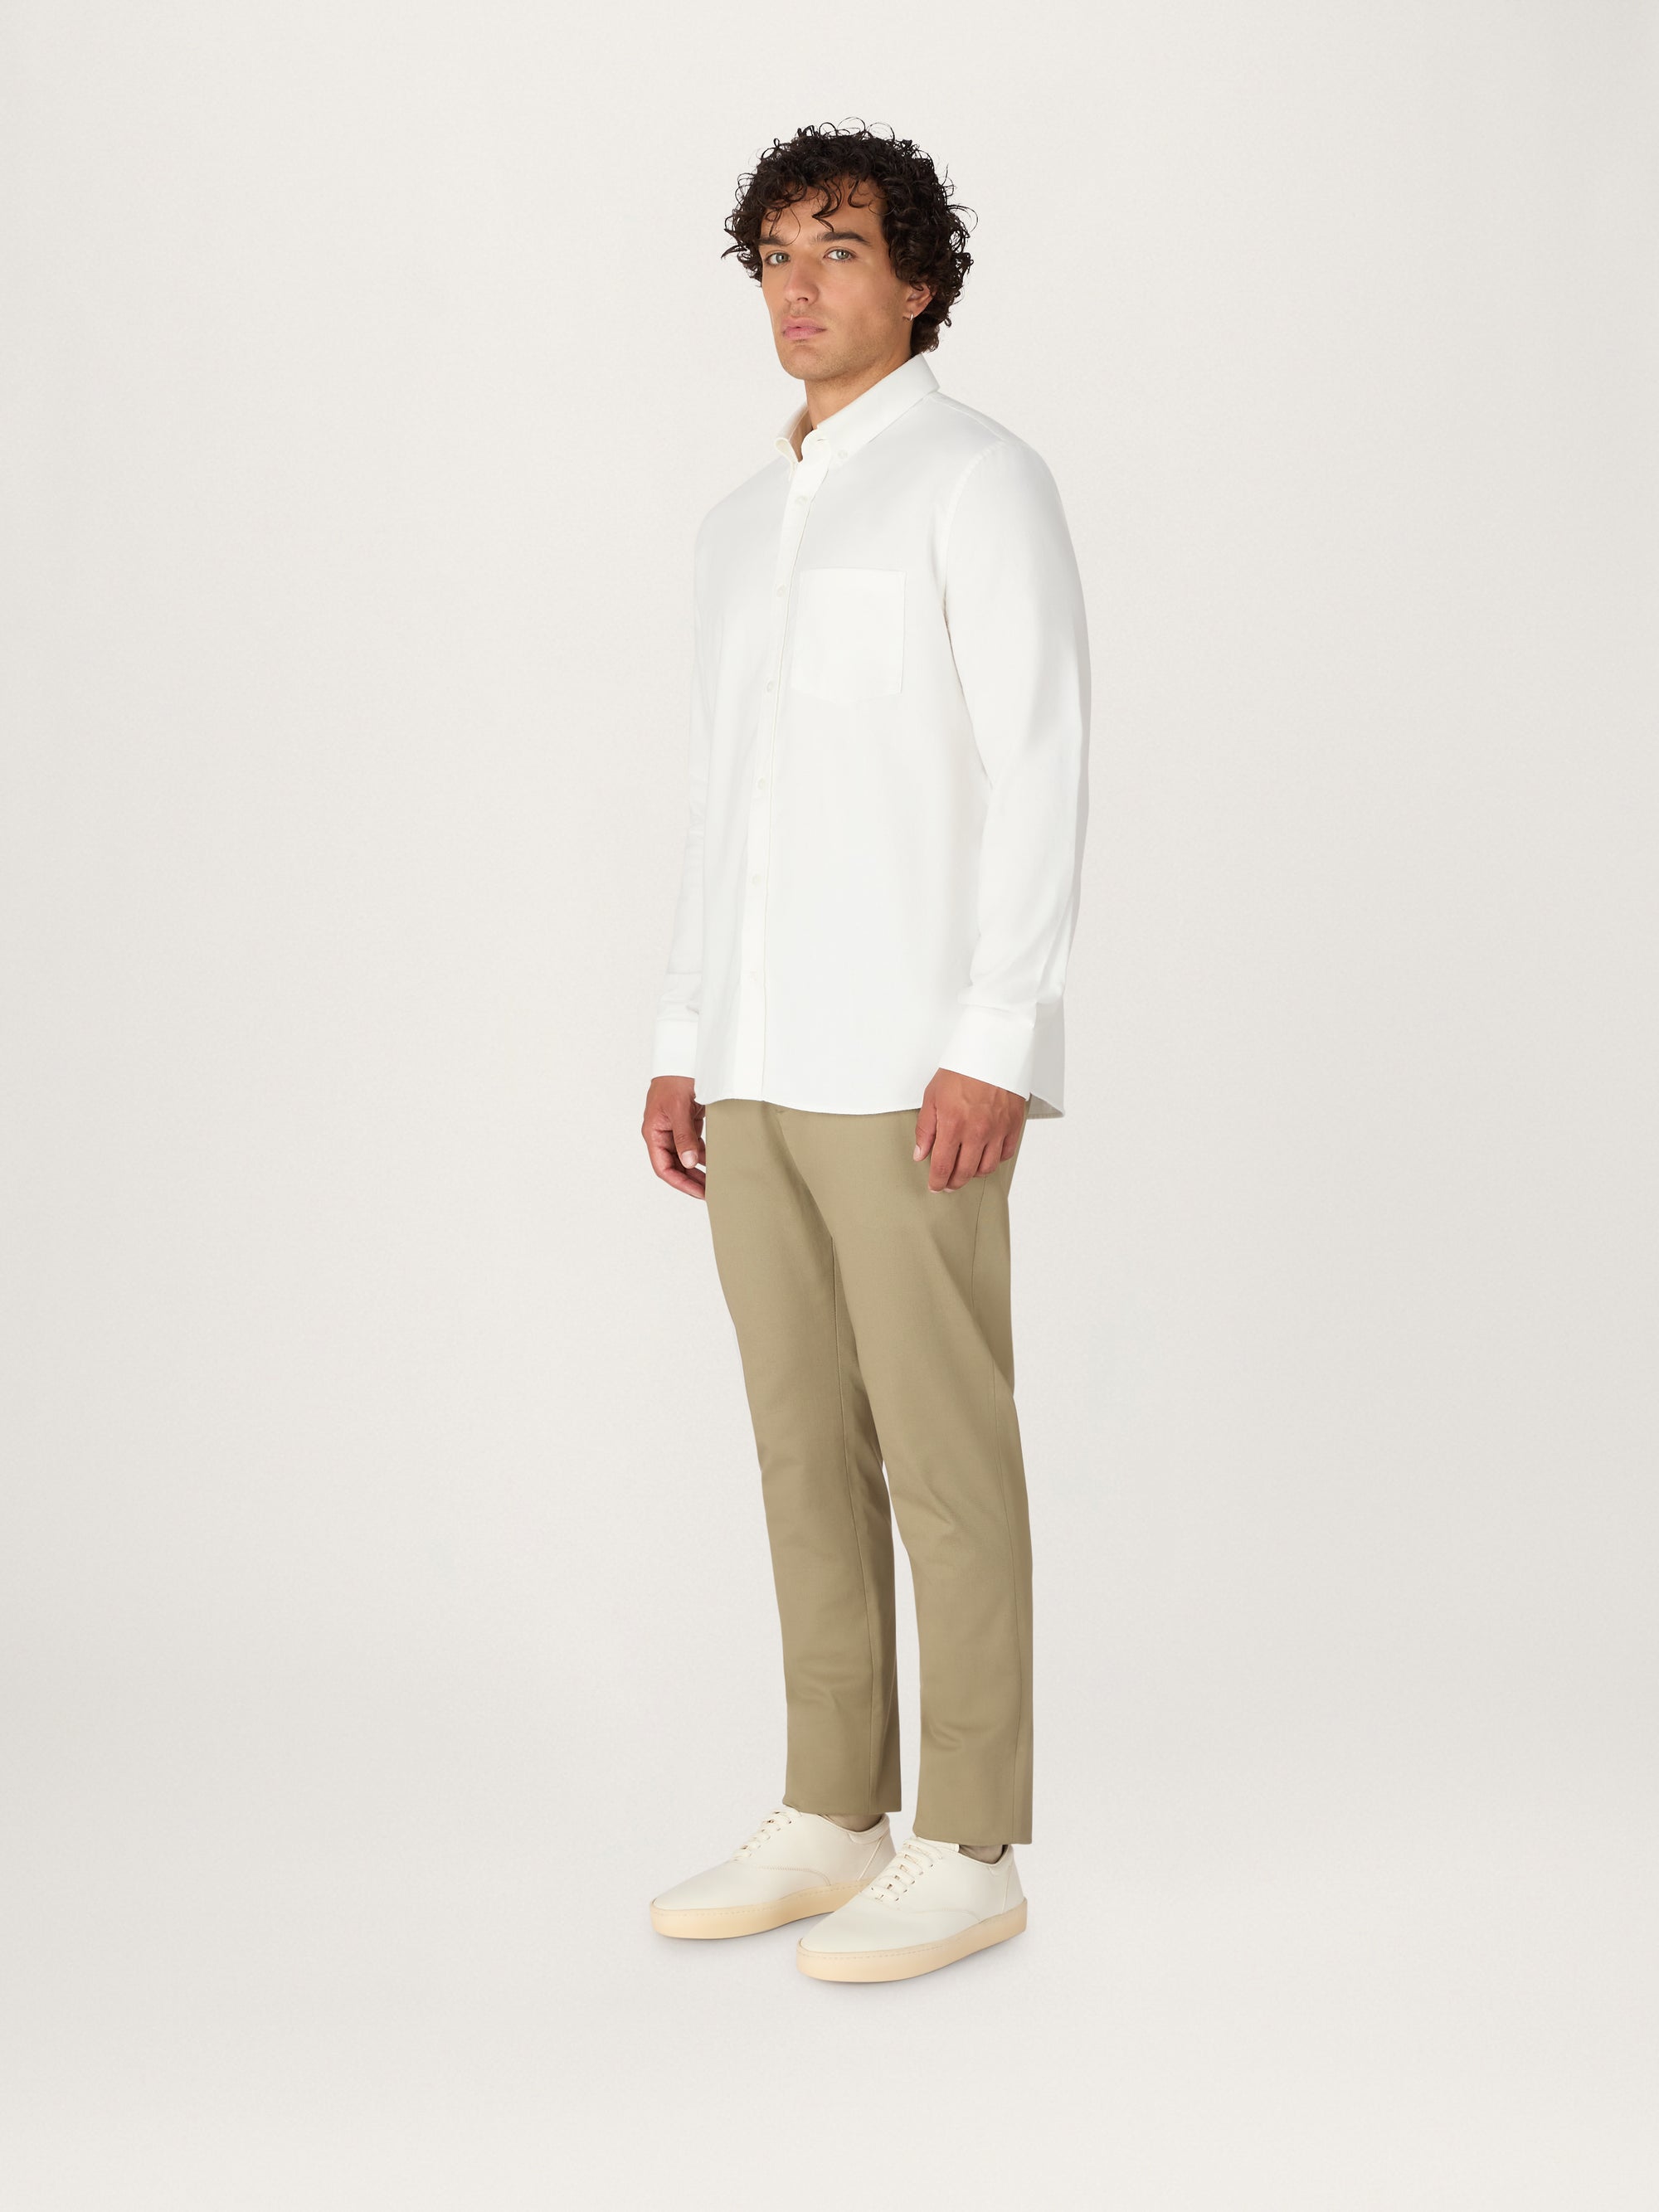 The Easy Shirt || Off White | Organic Cotton